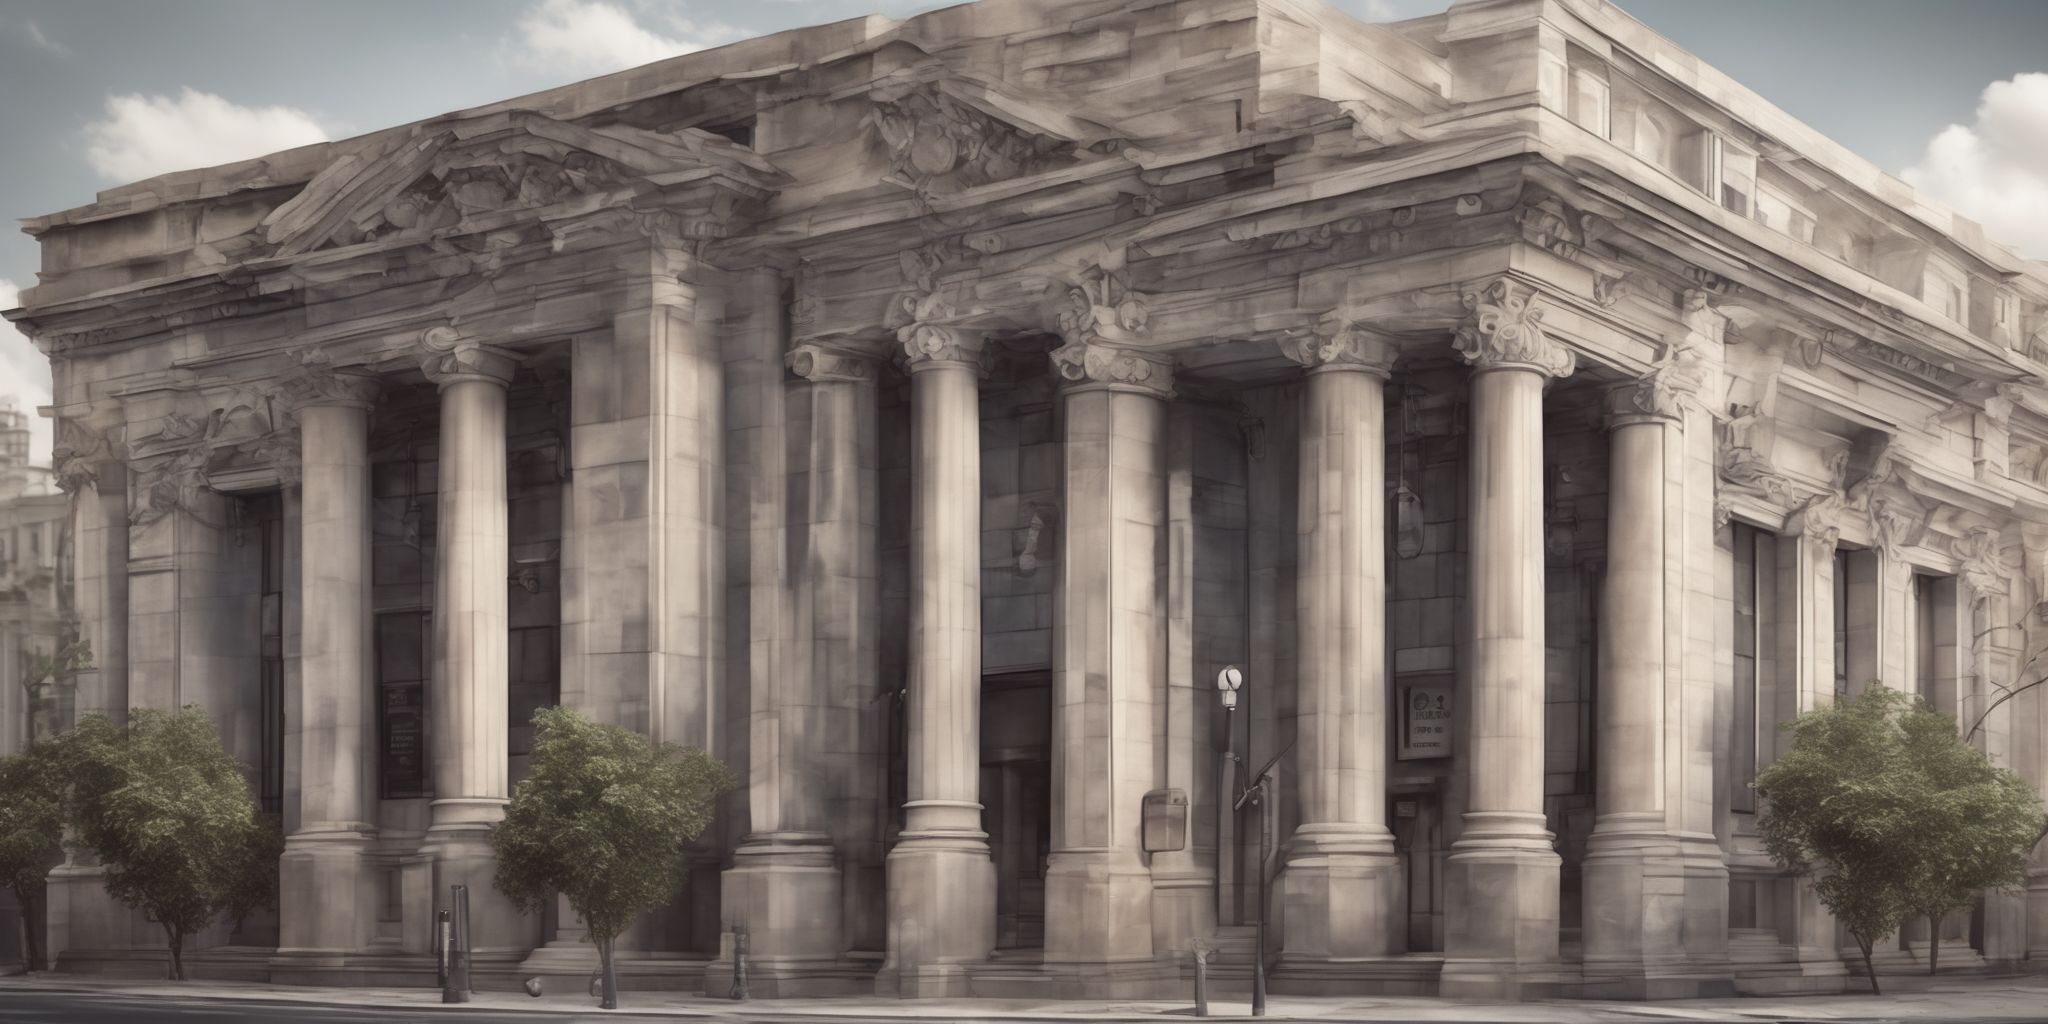 Bank  in realistic, photographic style